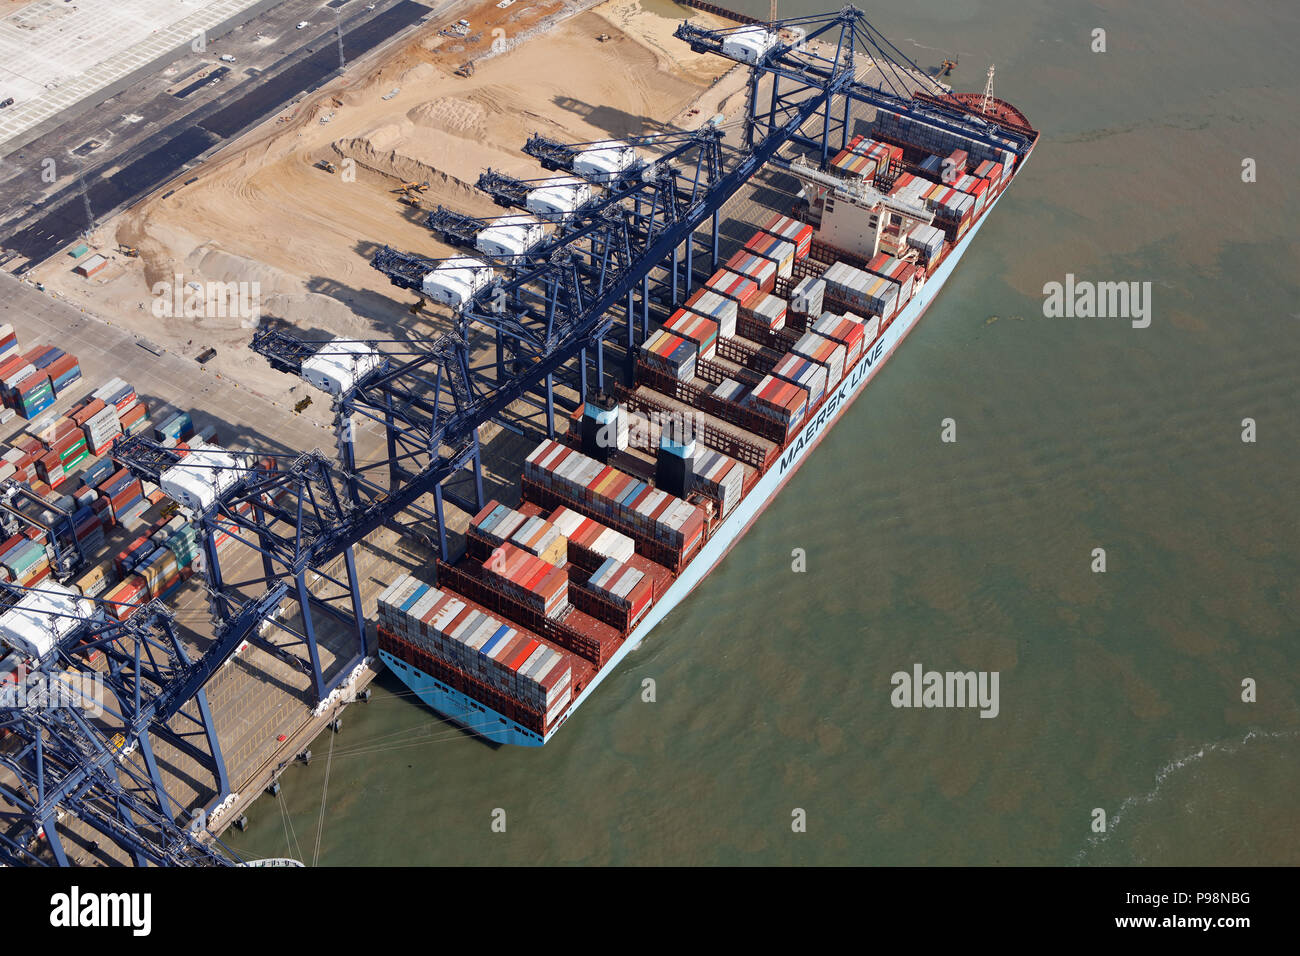 Aerial photograph of the Port of Felixstowe Stock Photo